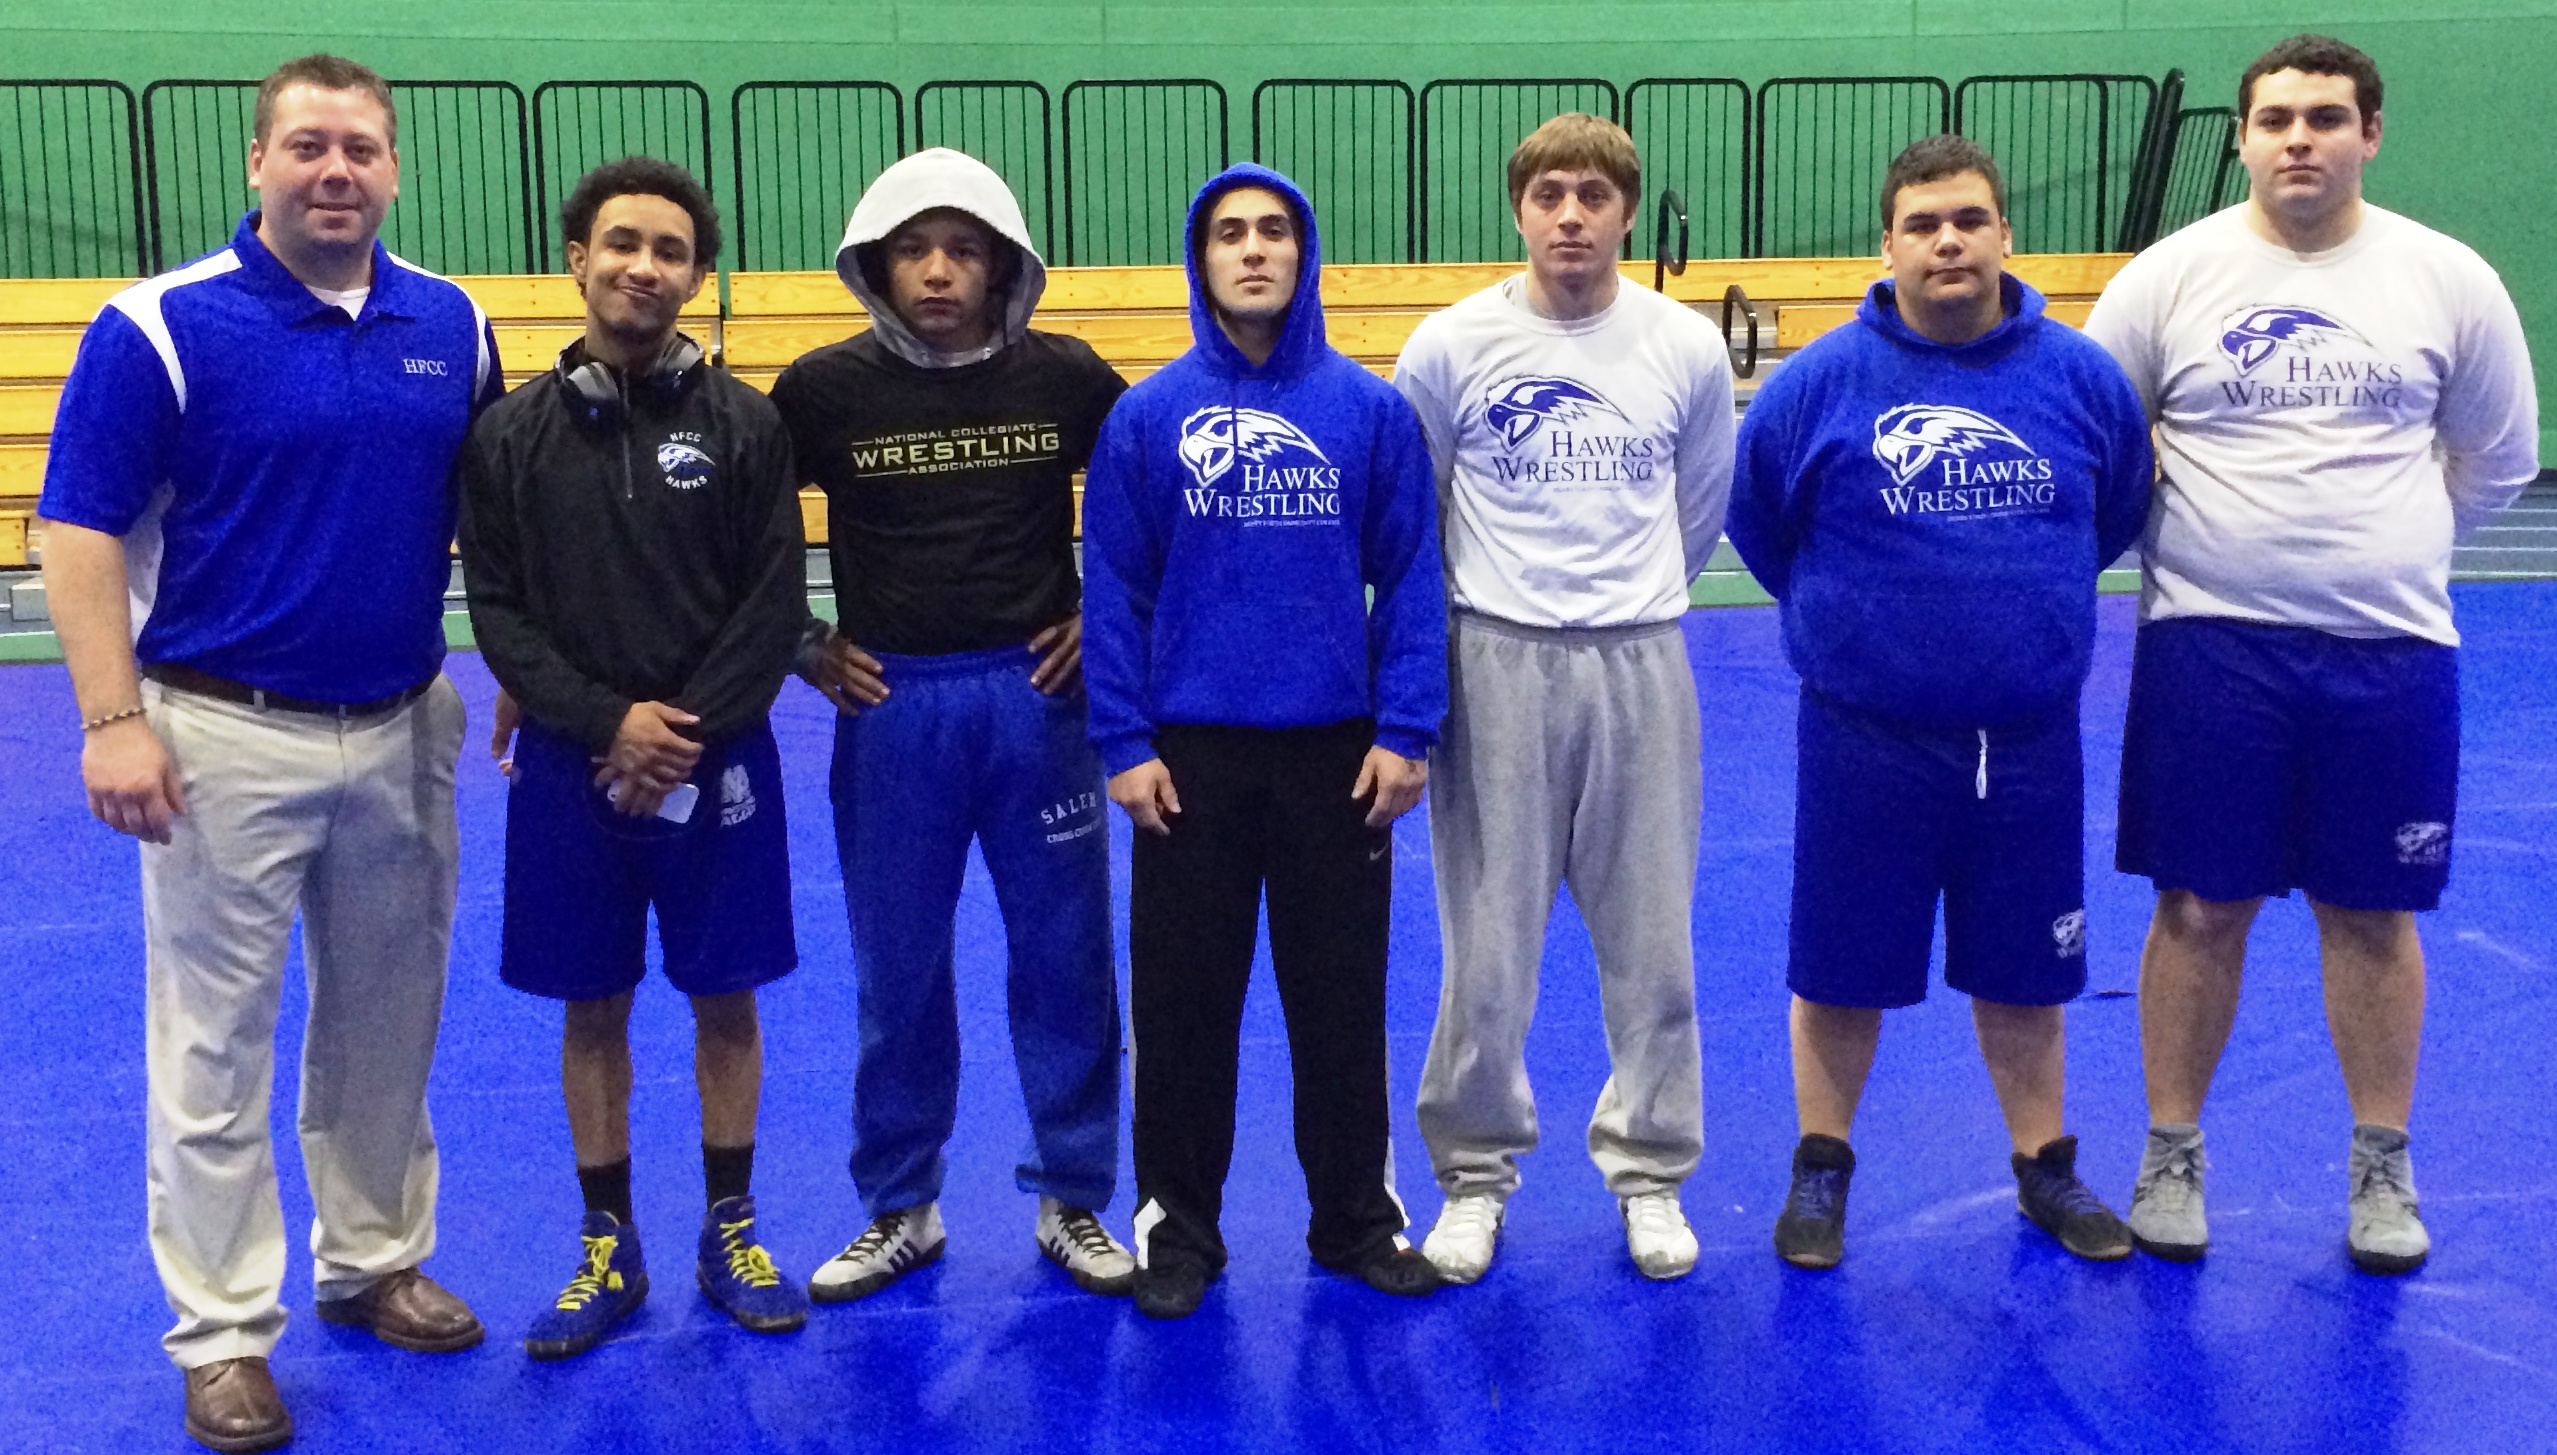 The HFCC Wrestling Club, left to right: Coach MacKenzie, Trey Berry of Plymouth (125 lb. class), Jesse O’Neal of Westland (133 lb. weight class), Ali Saad of Dearborn (141 lb. weight class), Jeremy Stankewitz of Plymouth (157 lb. weight class), Hass Doue